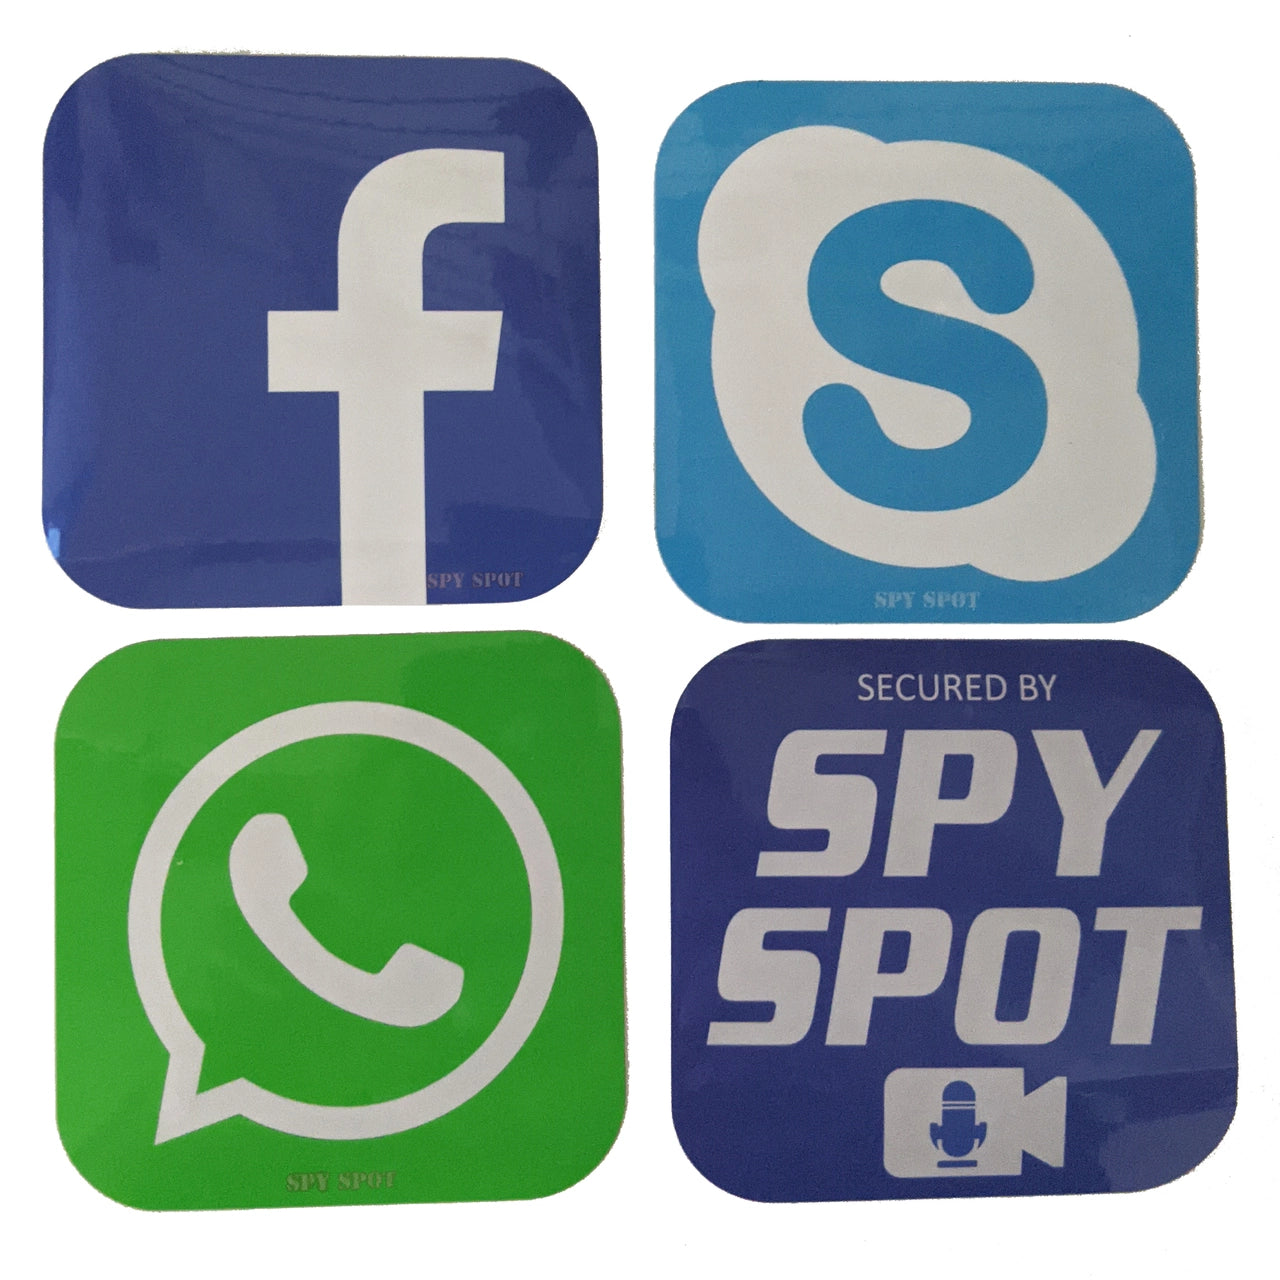 Spy Spot Set of 19 Social Media Video Travel Messaging Business Music Stickers Decals Water Resistant UV Resistant 3.35" x 3.35"